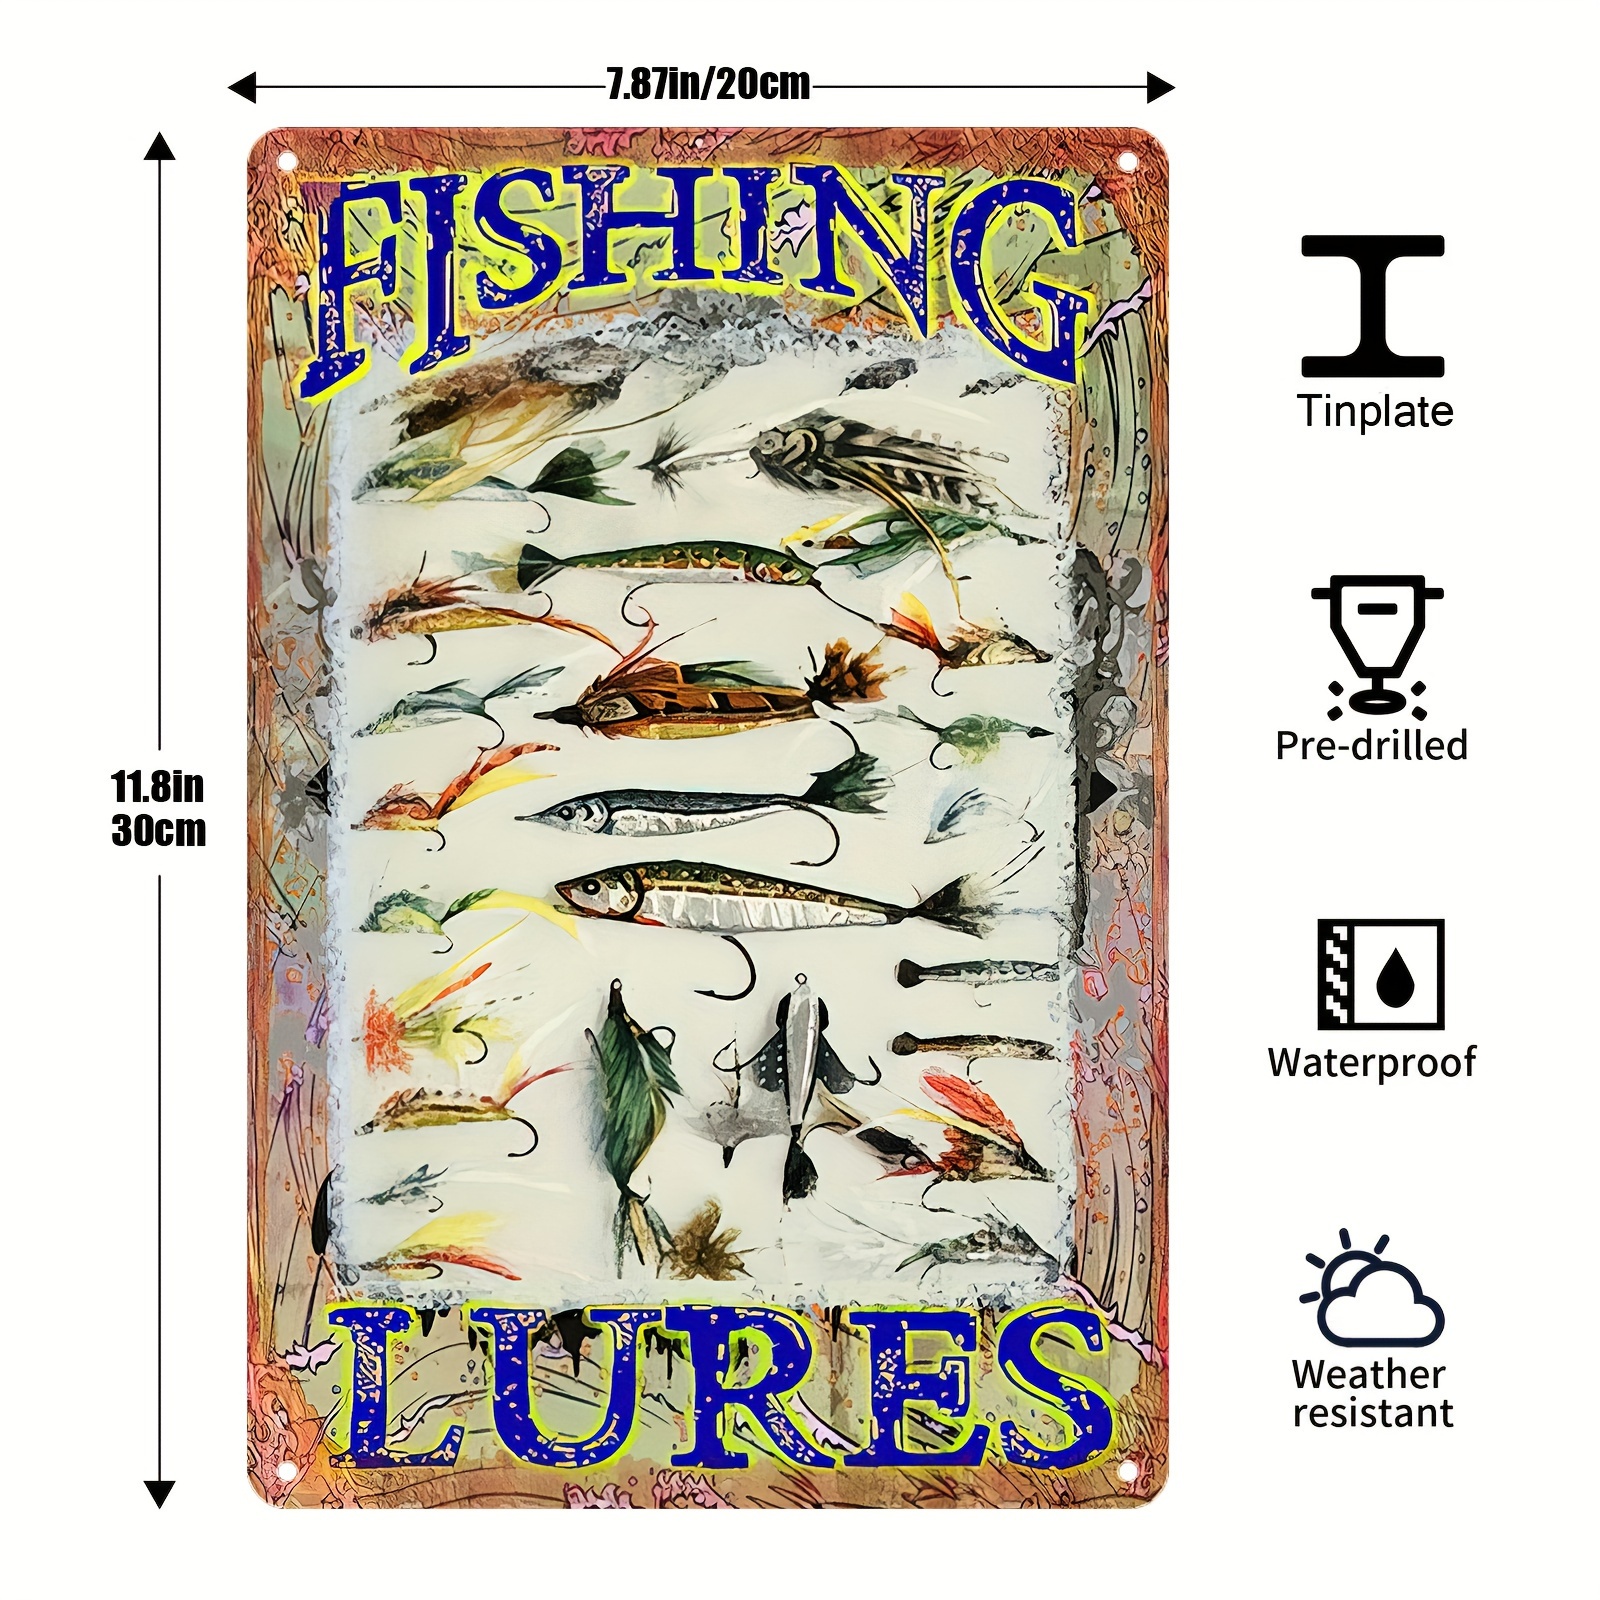 Vintage Fishing Lure Poster Retro Breeds of Fish Prints Man Cave